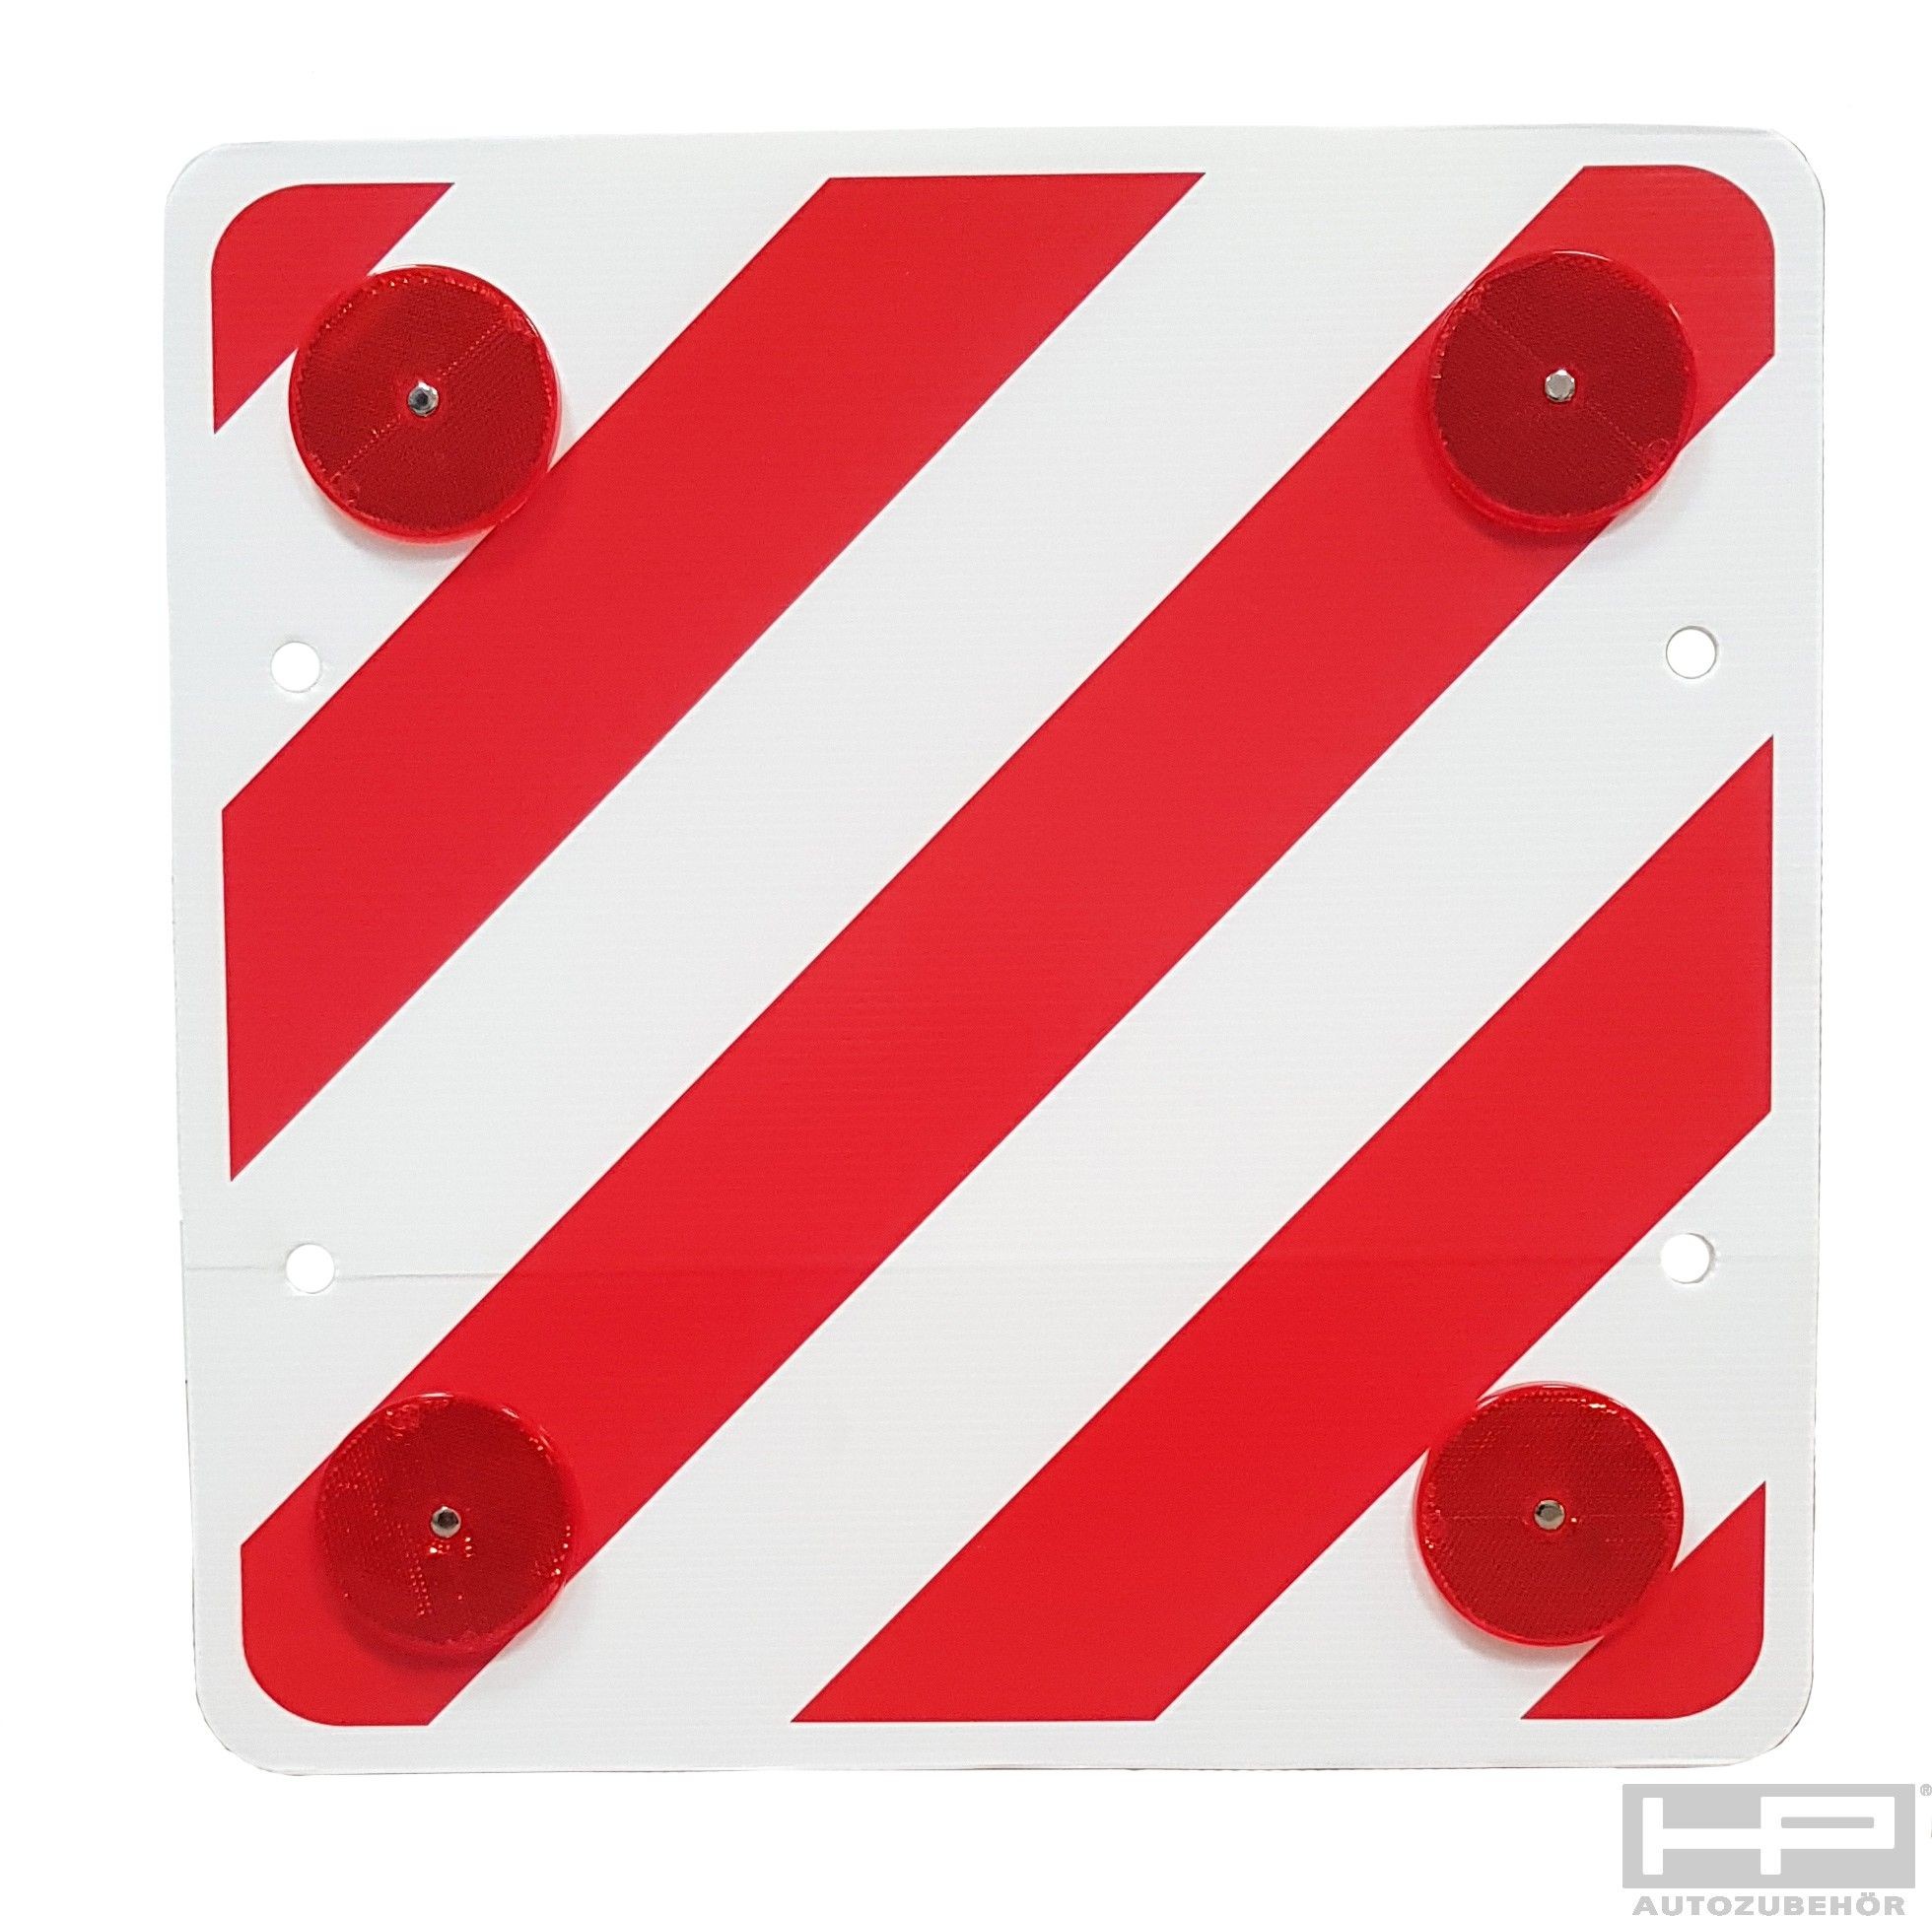 HPAUTO 25136 Parking Warning Plate VW POLO